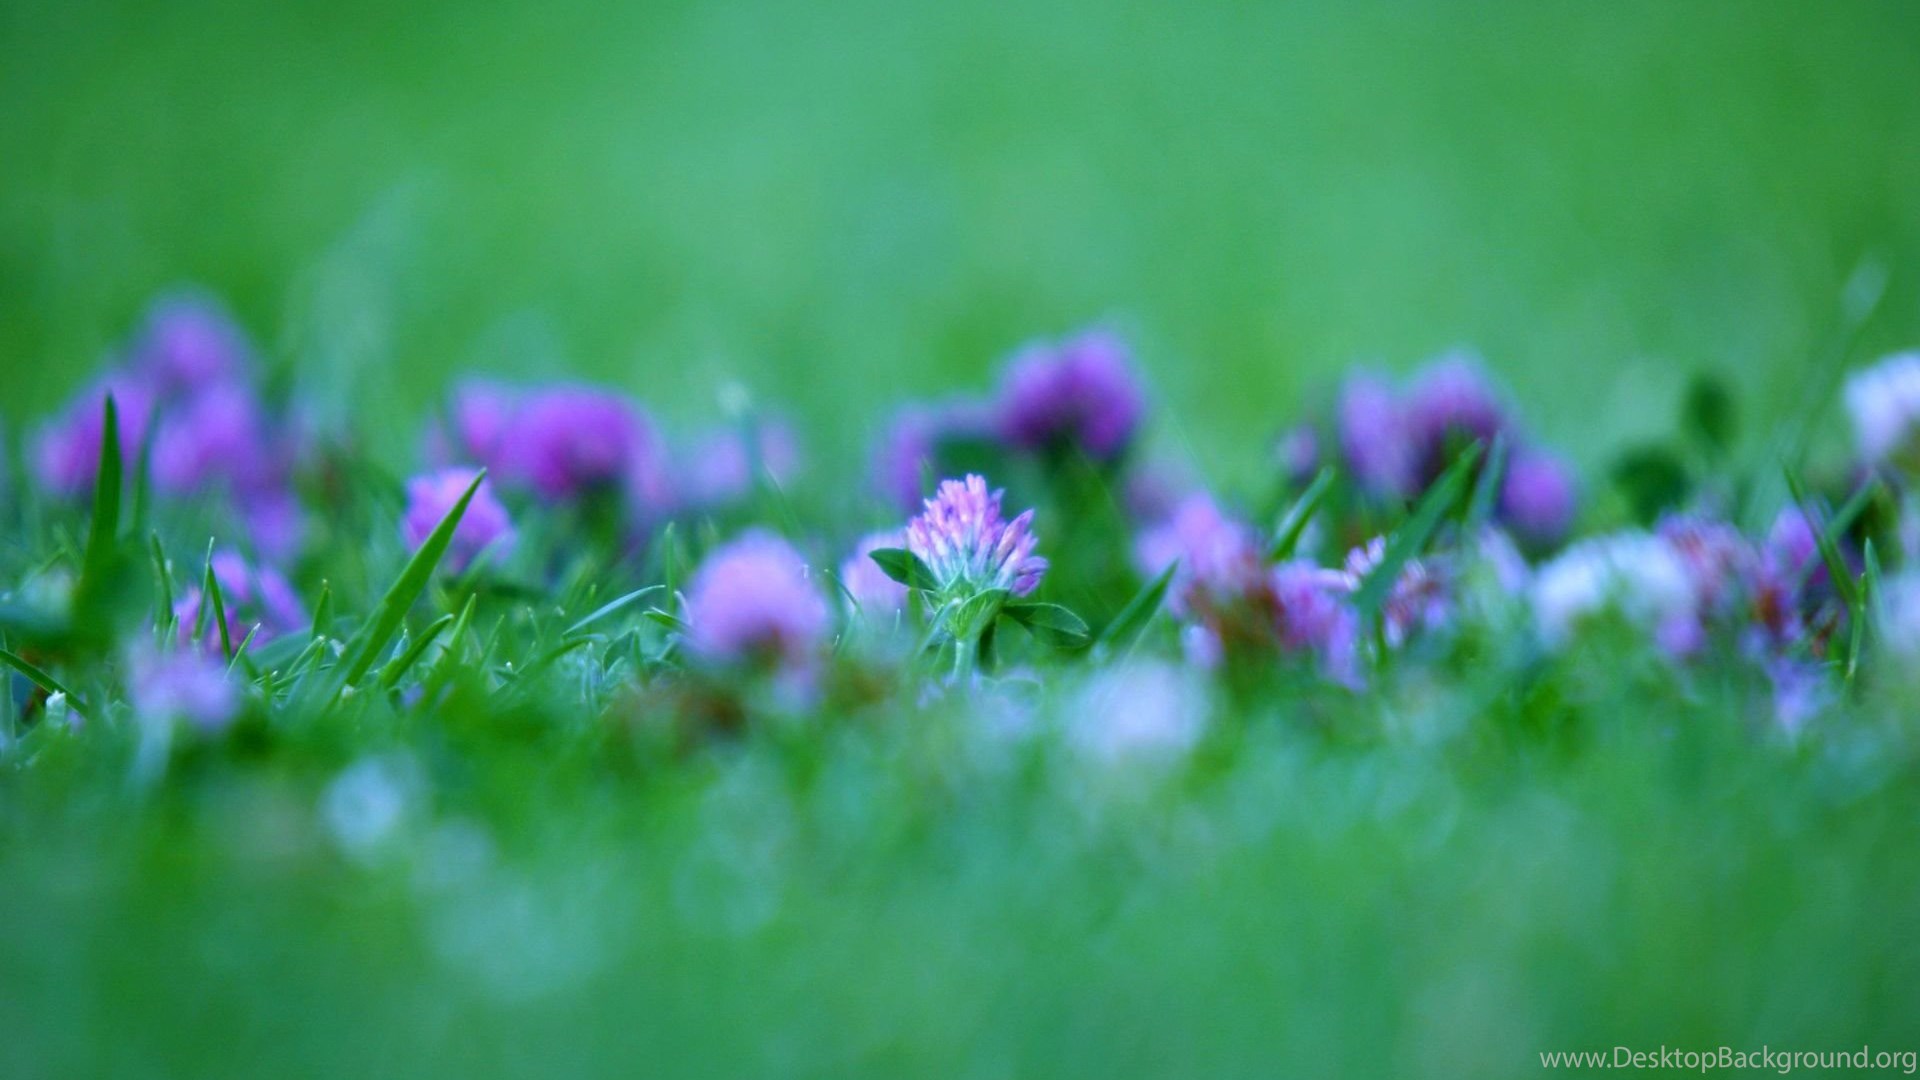 Wallpapers Download For Mobile Free Hd For Mobile Free - Green Purple Flower Hd - HD Wallpaper 